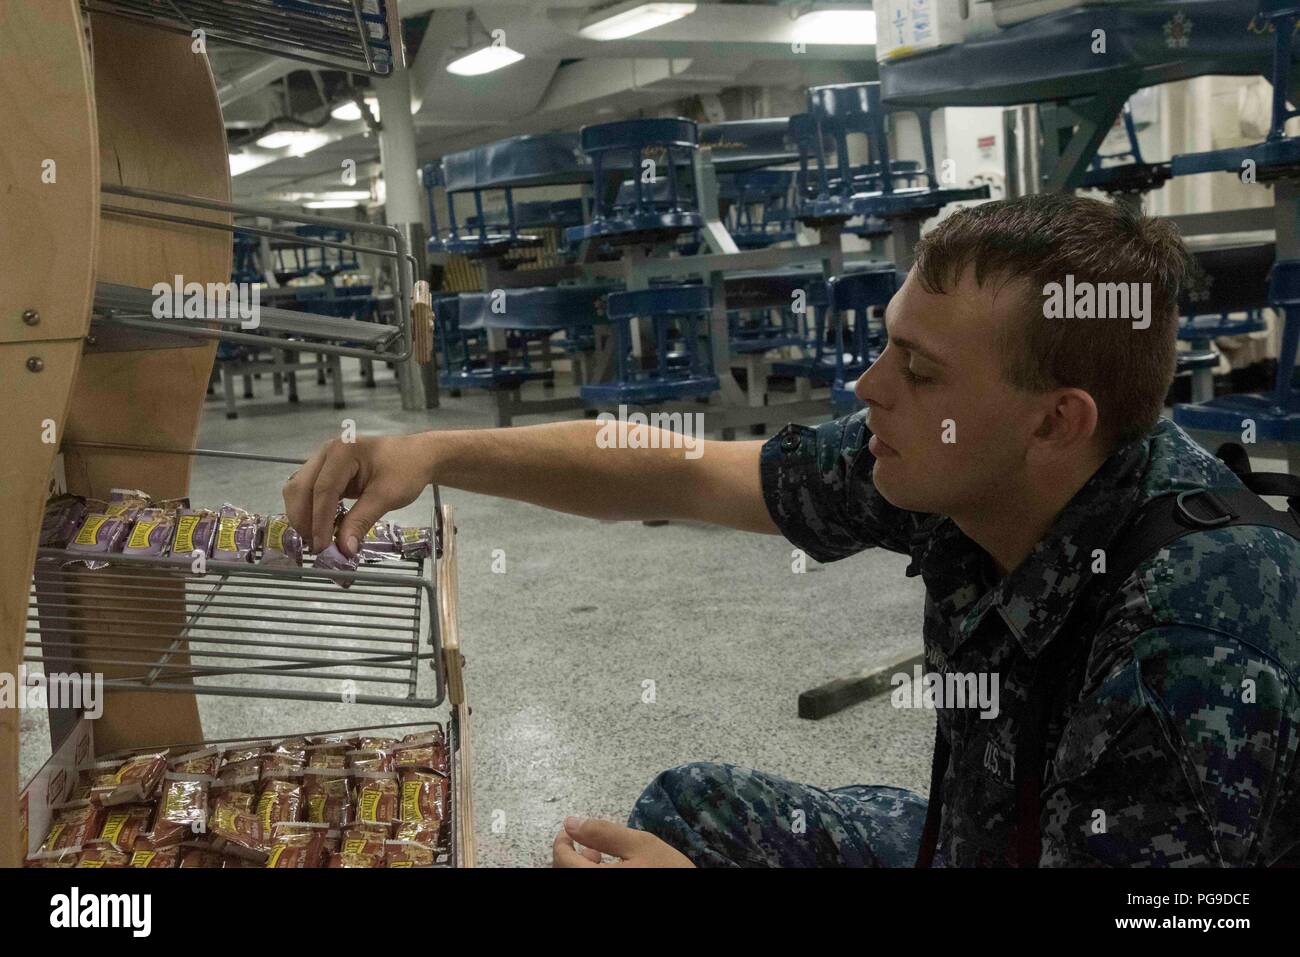 180821-N-MY760-001   PORTSMOUTH, Va. (Aug. 21, 2018)Culinary Specialist Seaman Apprentice Jesse Yarbrough-Lane, from Knoxville, Ten., restocks the galley aboard the aircraft carrier USS Dwight D. Eisenhower (CVN 69)(Ike). Ike is undergoing a Planned Incremental Availability (PIA) at Norfolk Naval Shipyard during the maintenance phase of the Optimized Fleet Response Plan (OFRP). (U.S. Navy photo by Mass Communication Specialist Seaman Apprentice Tyler Miller) Stock Photo